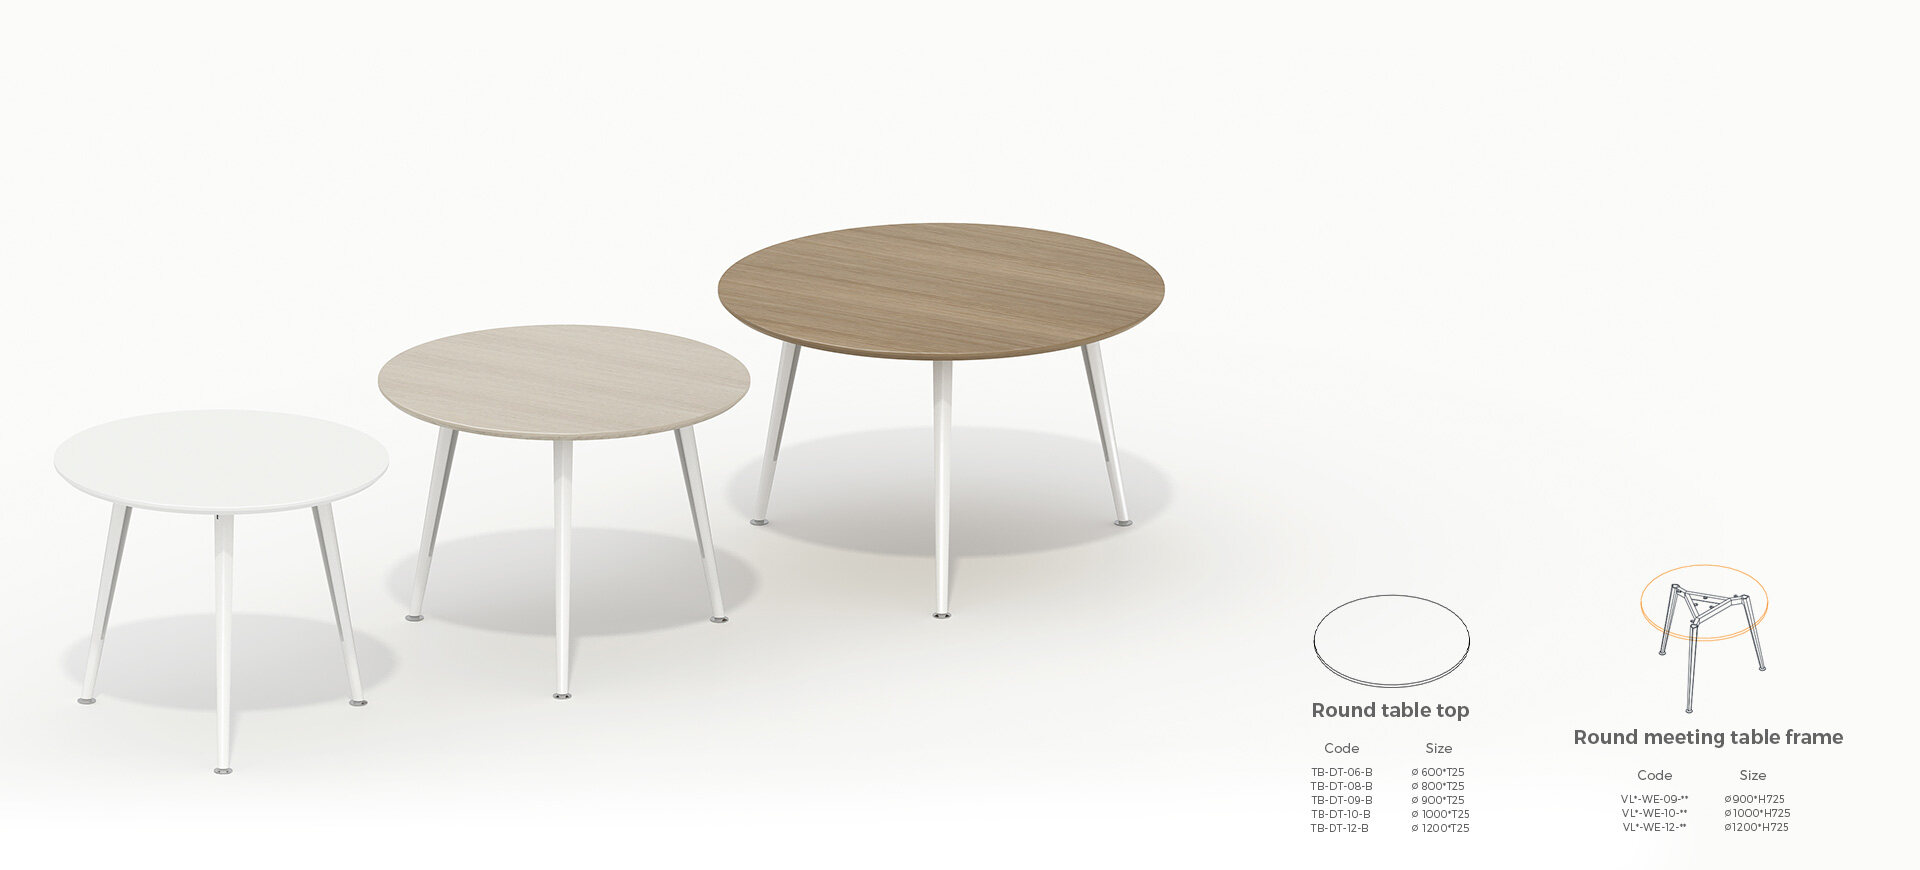 Coffee table,Round table,Negotiation table